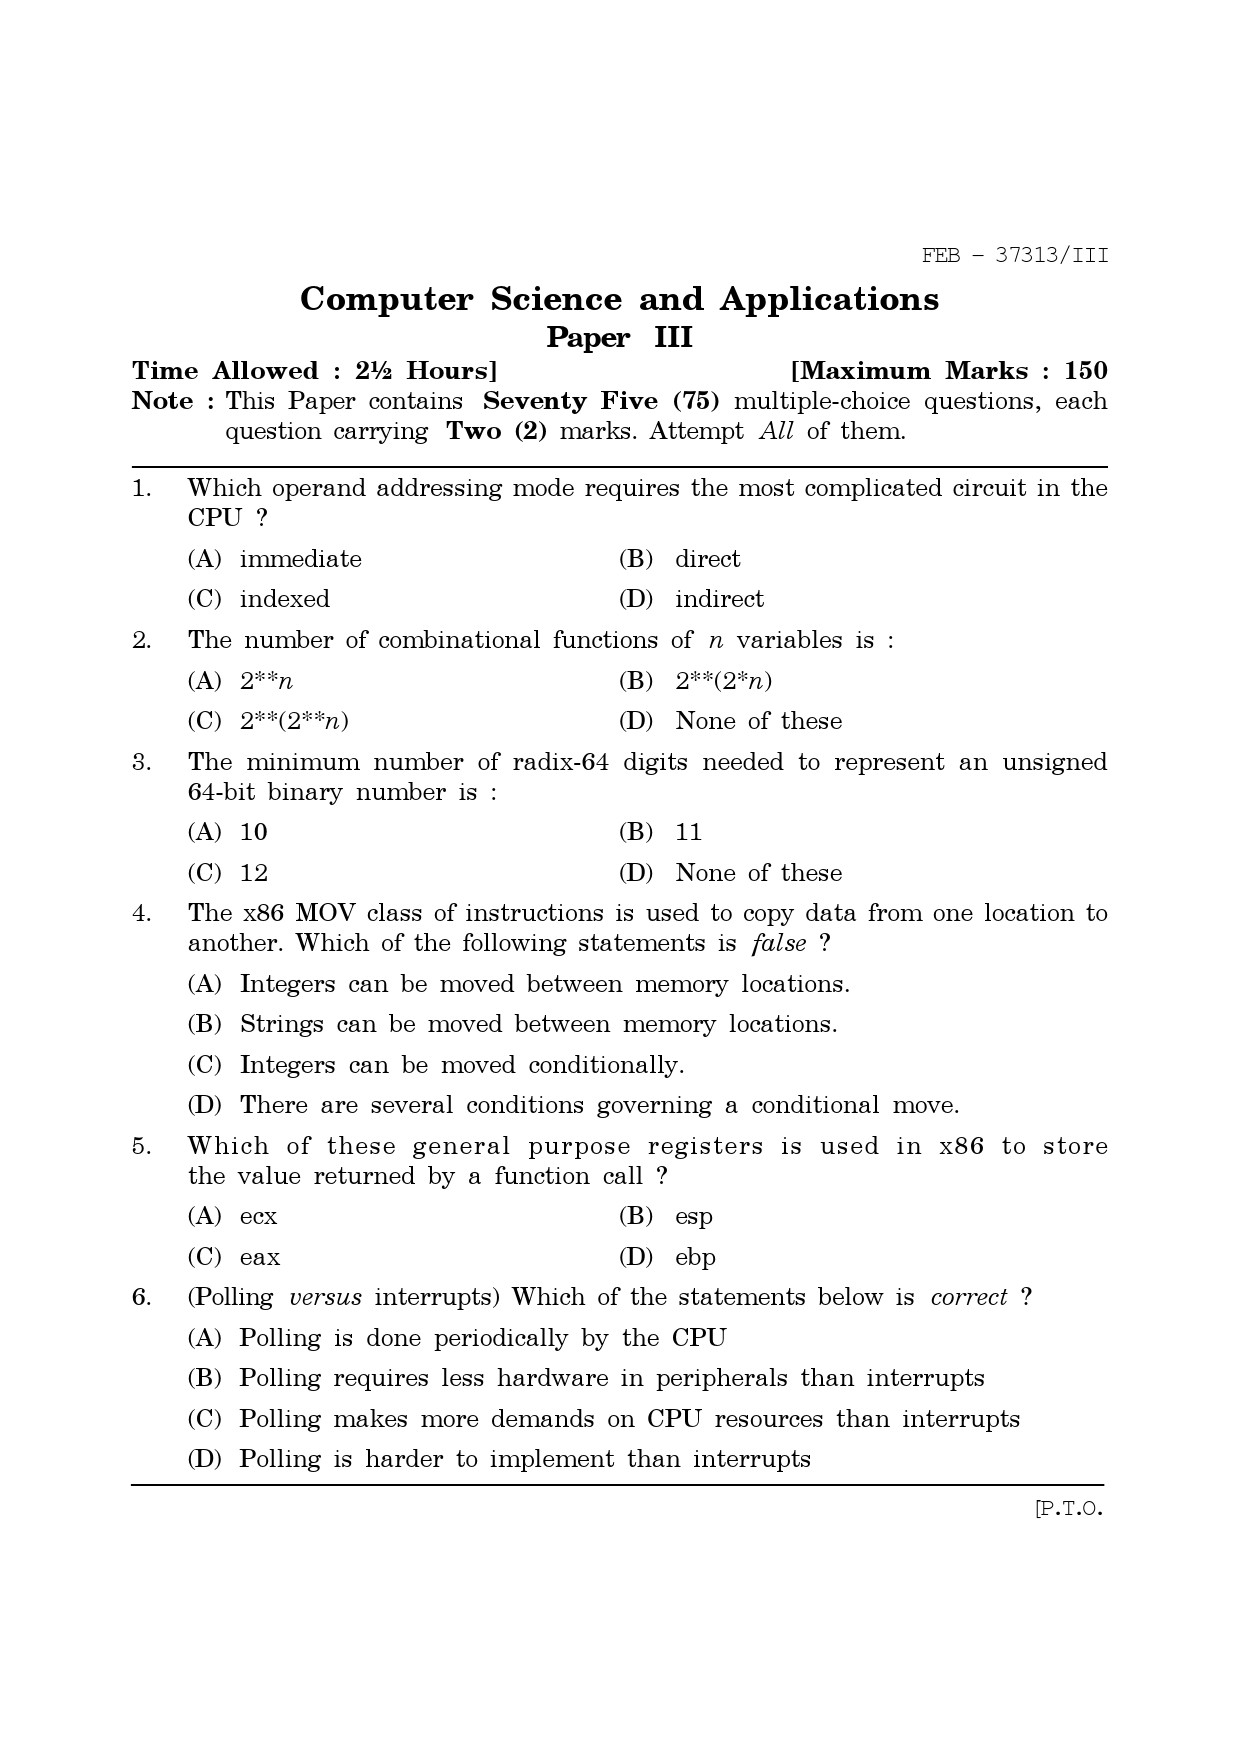 Maharashtra SET Computer Science and Application Question Paper III February 2013 1